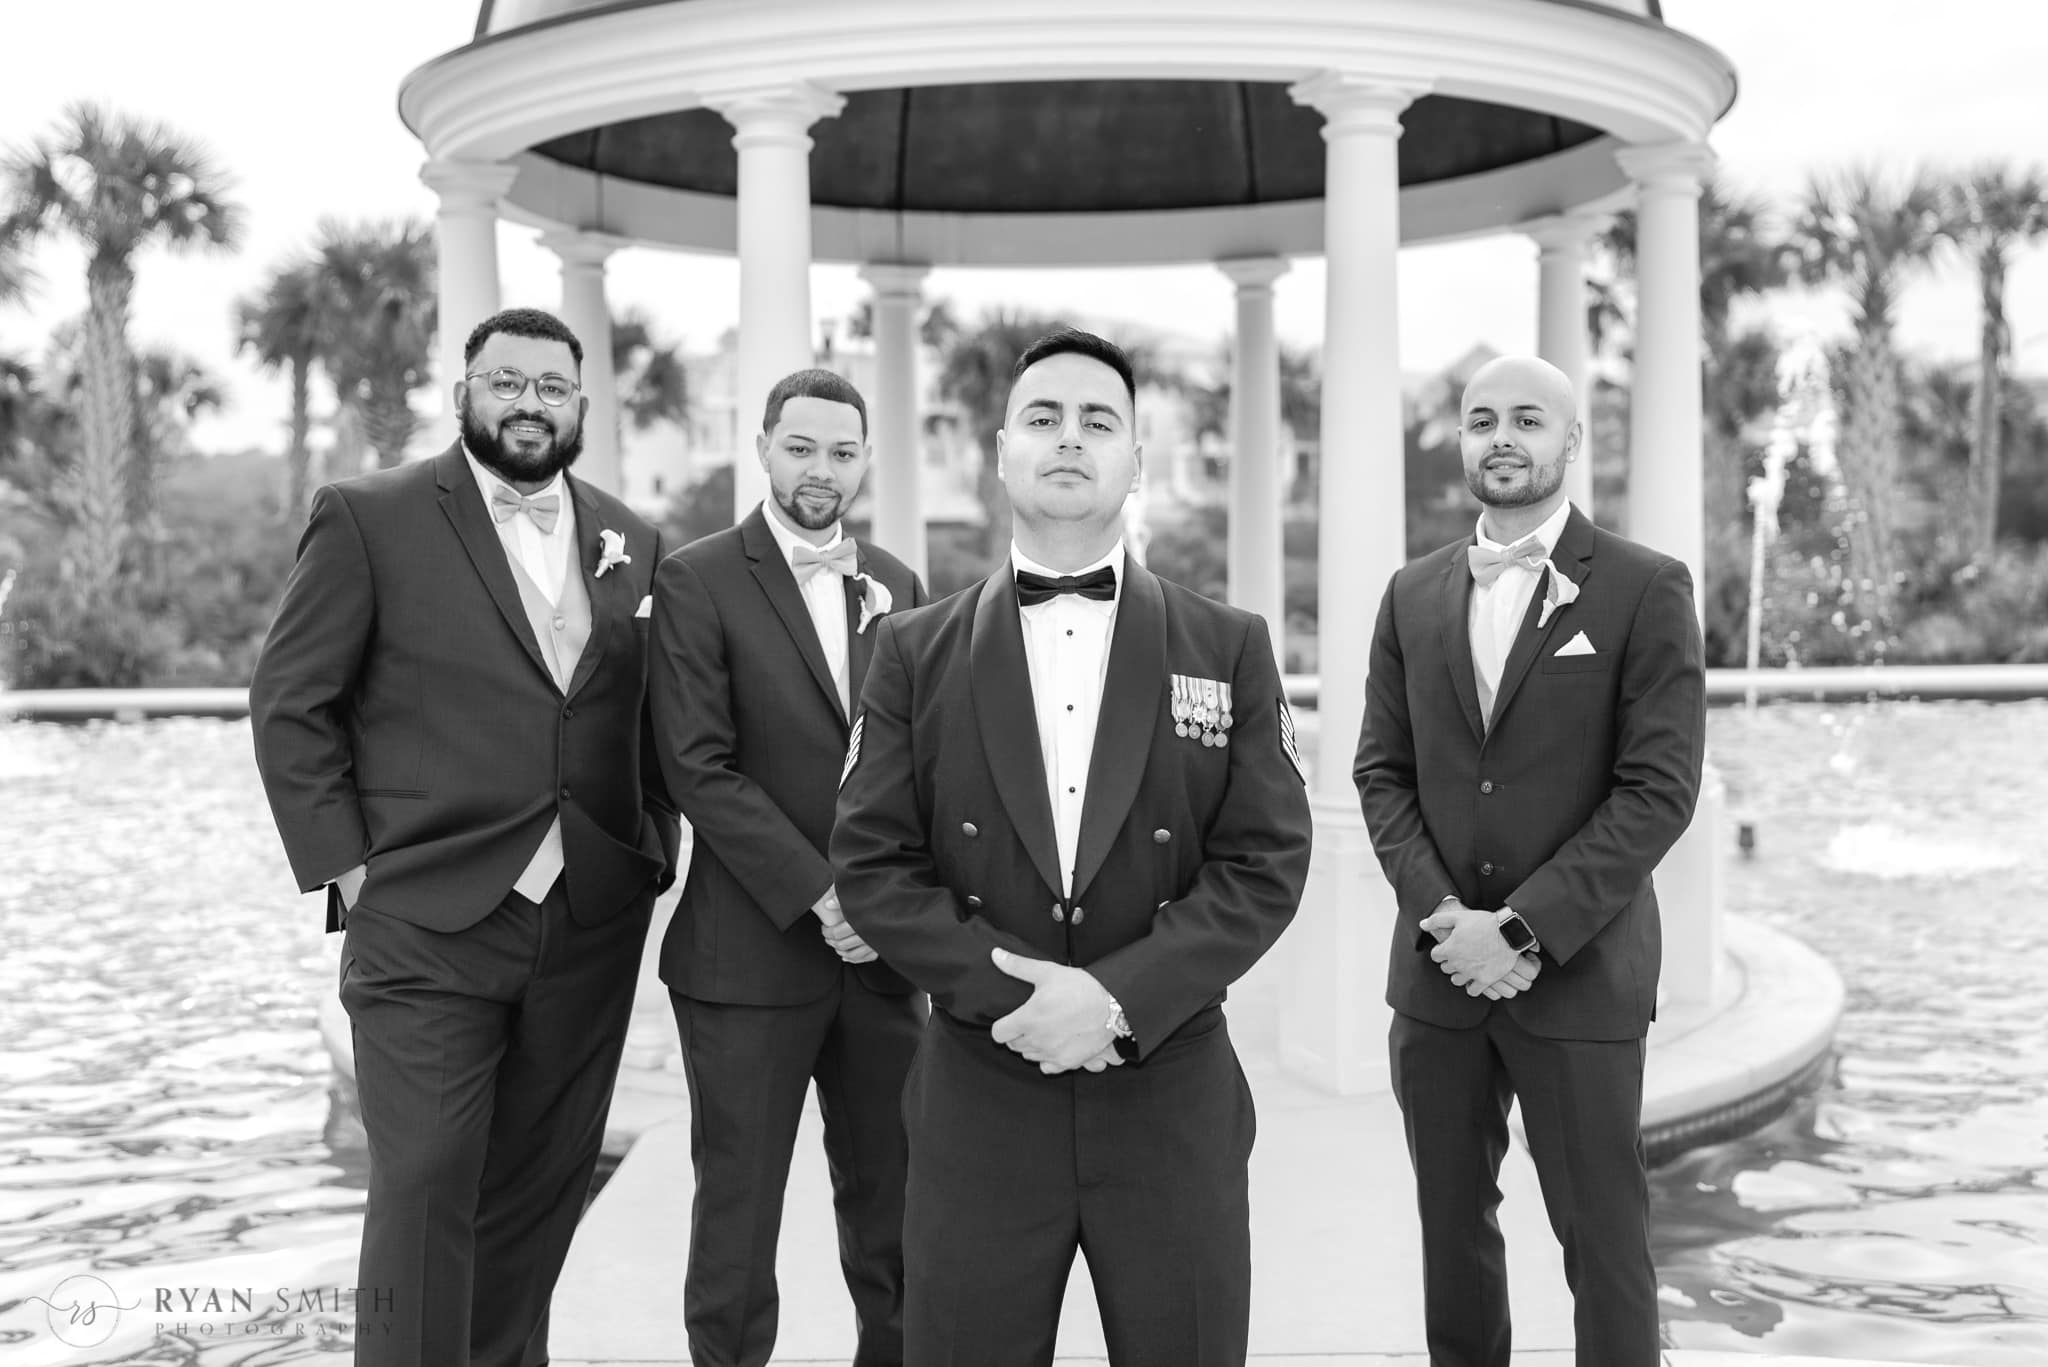 Groomsmen in black and white - 21 Main Events at North Beach